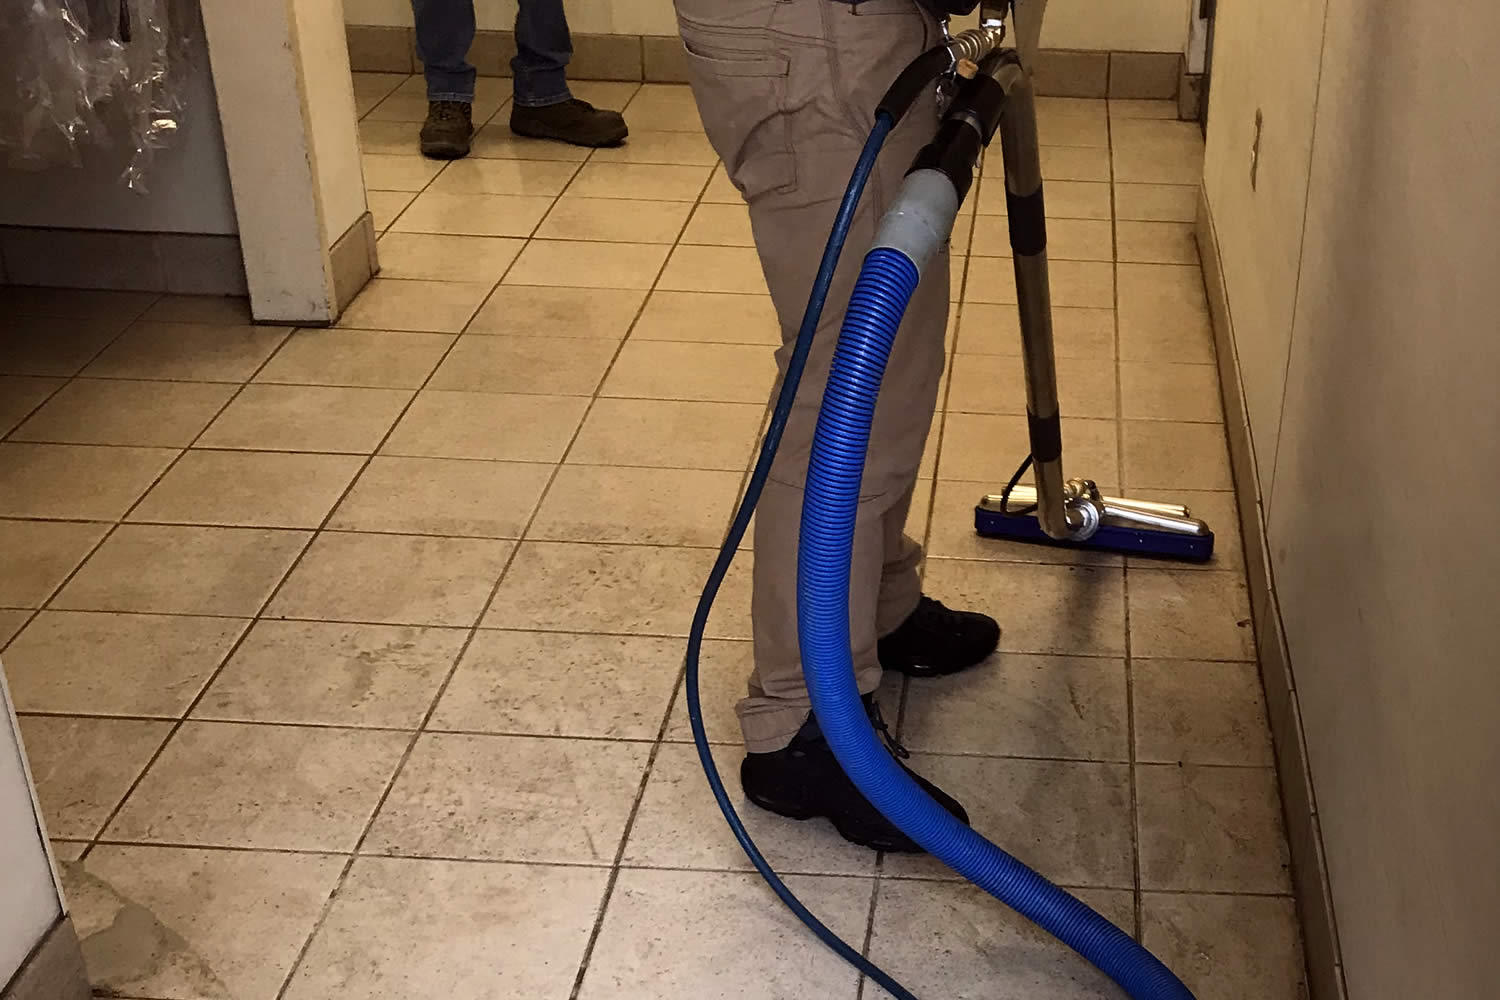 carolina-clean-pro-carpet-cleaning-upholstery-tile-grout-cleaning-hard-floor-hardwood-floor-cleaning-service-for-Garner-Raleigh-Cary-Clayton-Smithfield-Johnston-County-Wake-County-NC-31